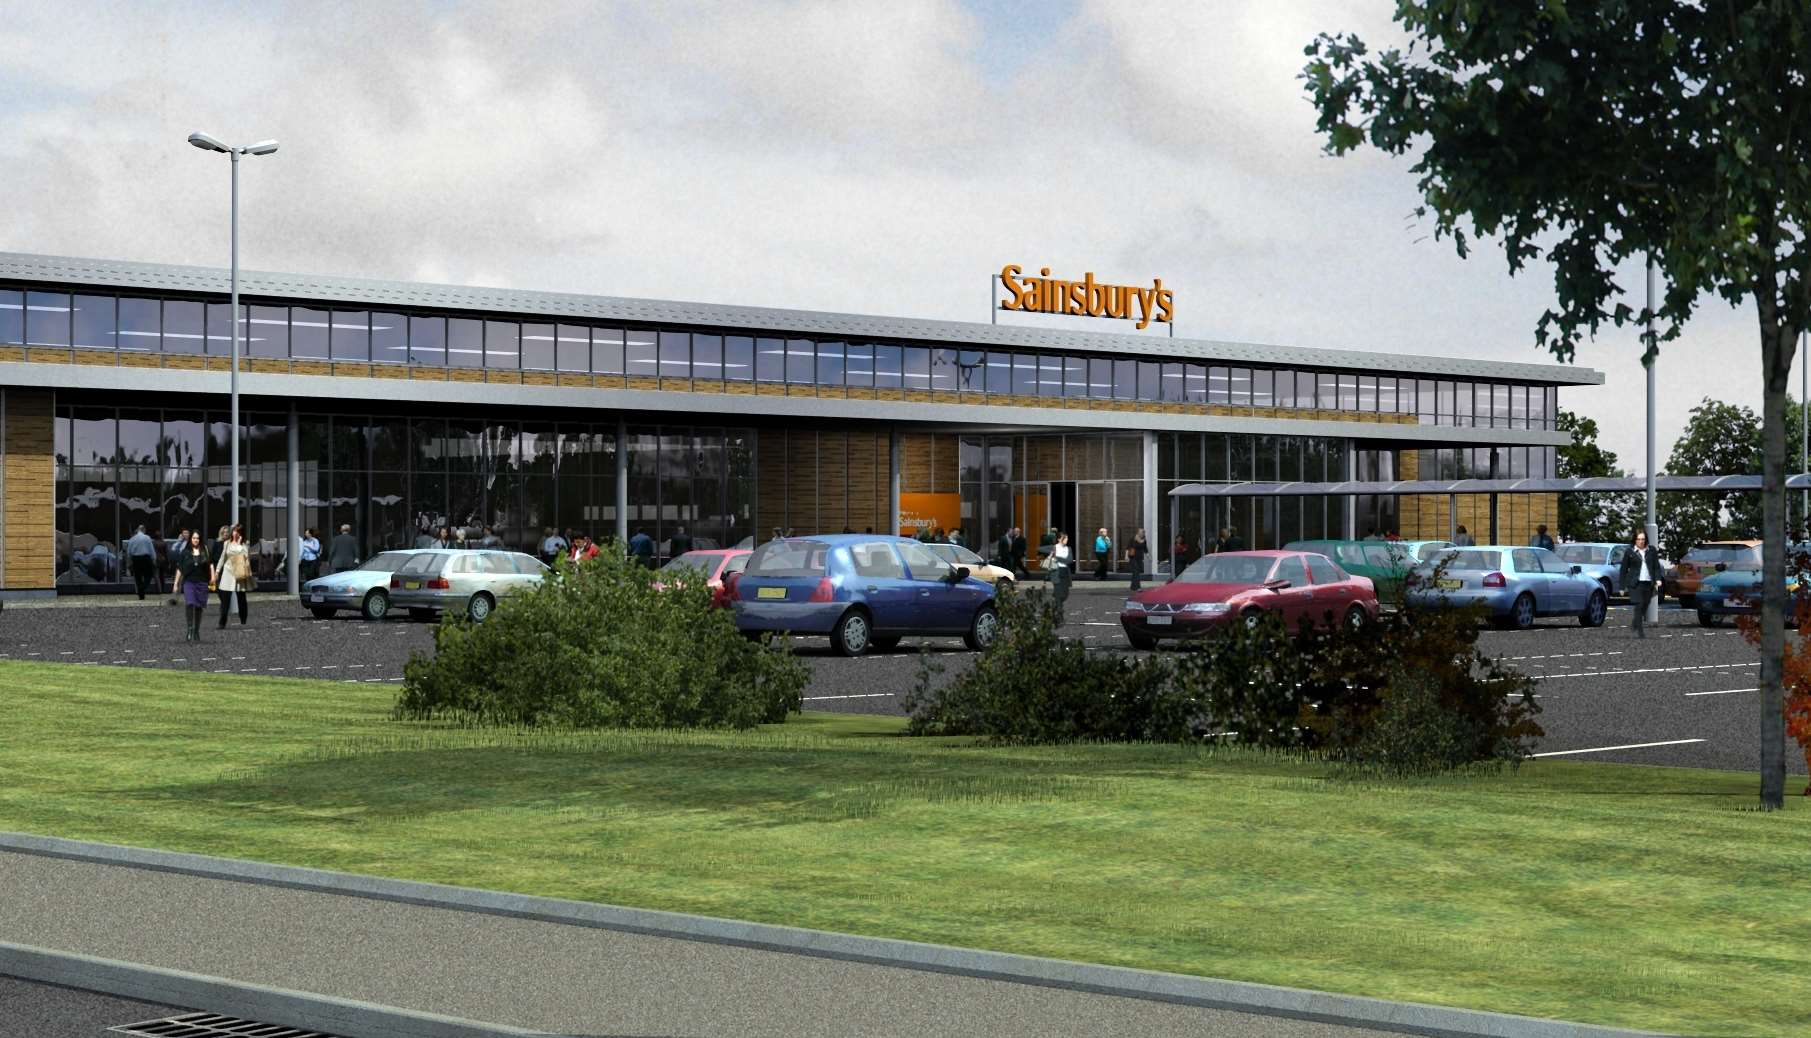 How the new Sainsbury's at Altira Business Park was set to look like